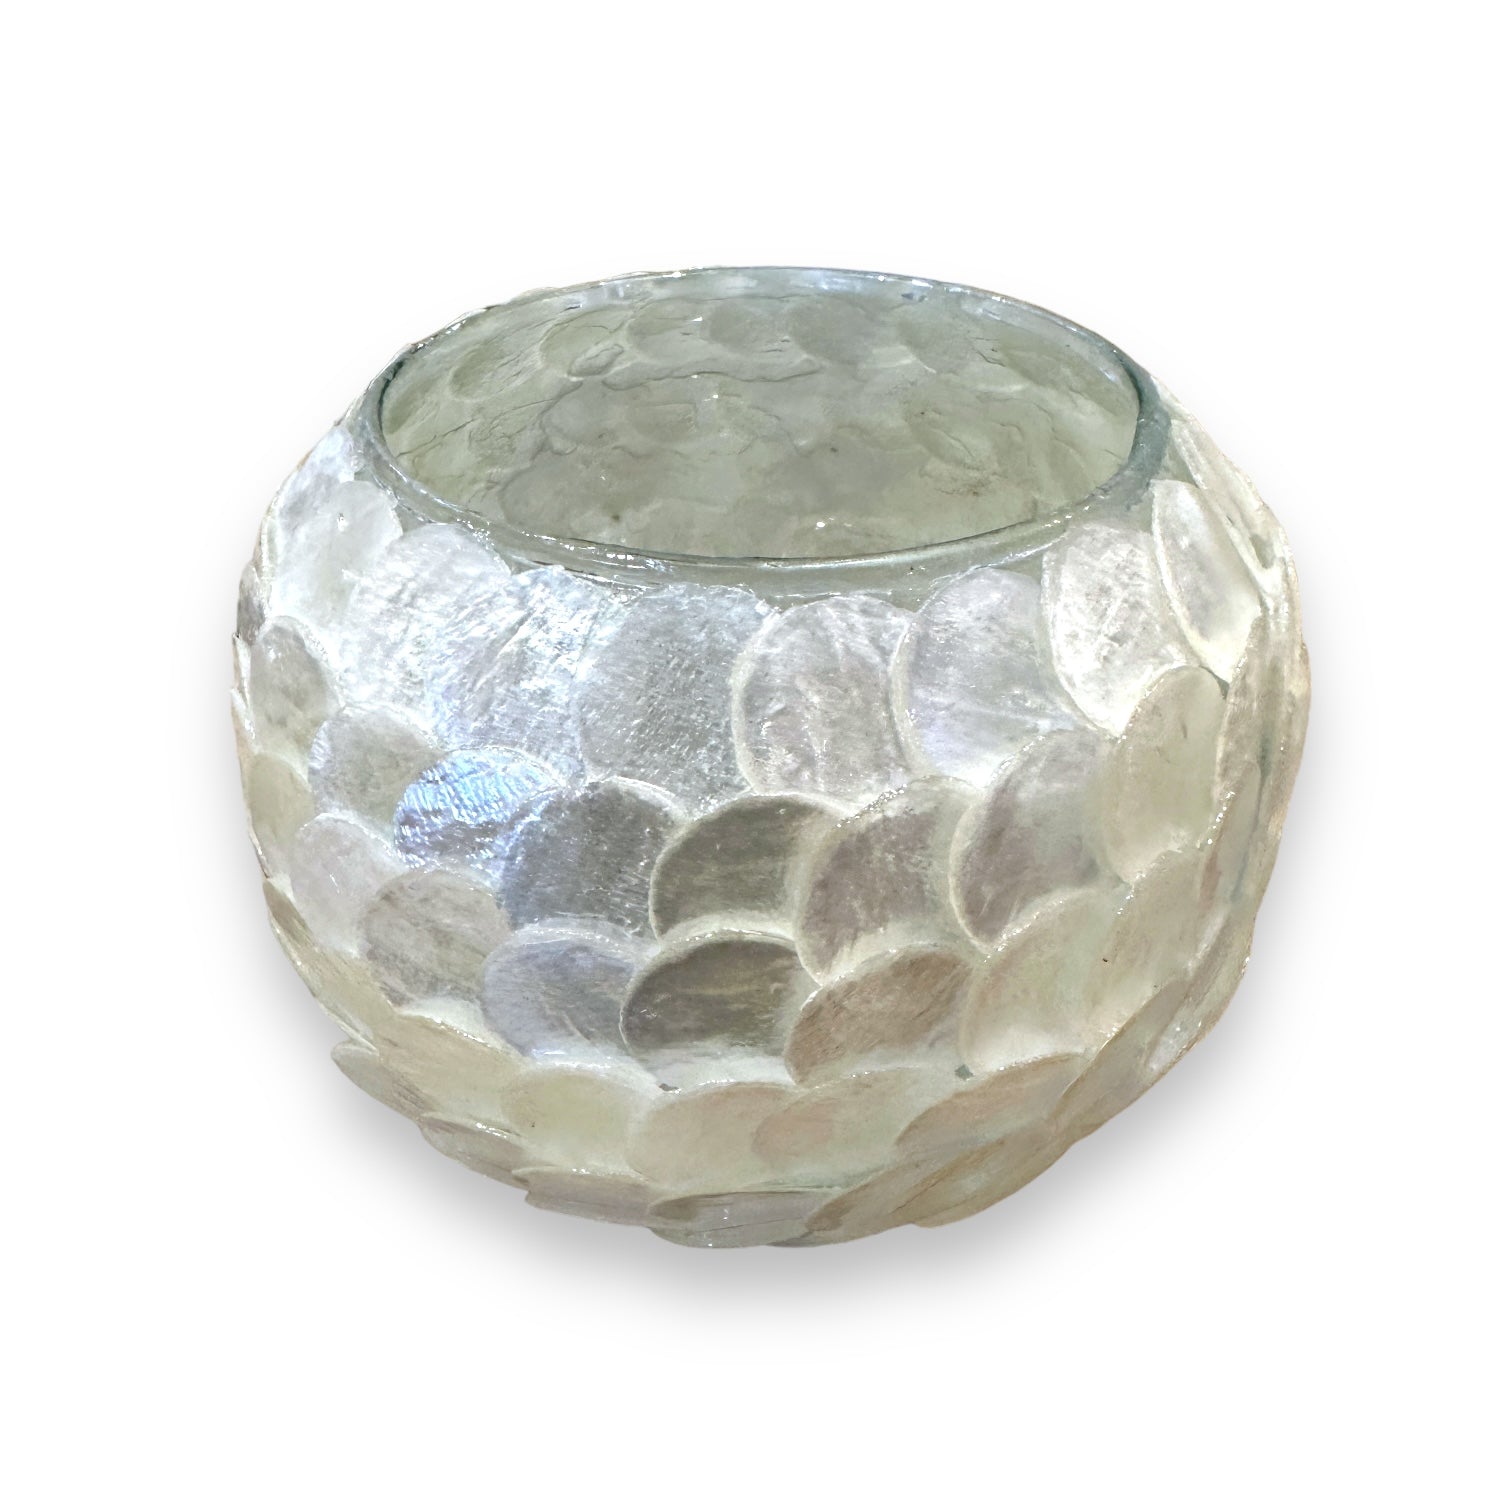 Round Capiz Disc Candleholder - Pearl - 4-1/2-in - Mellow Monkey